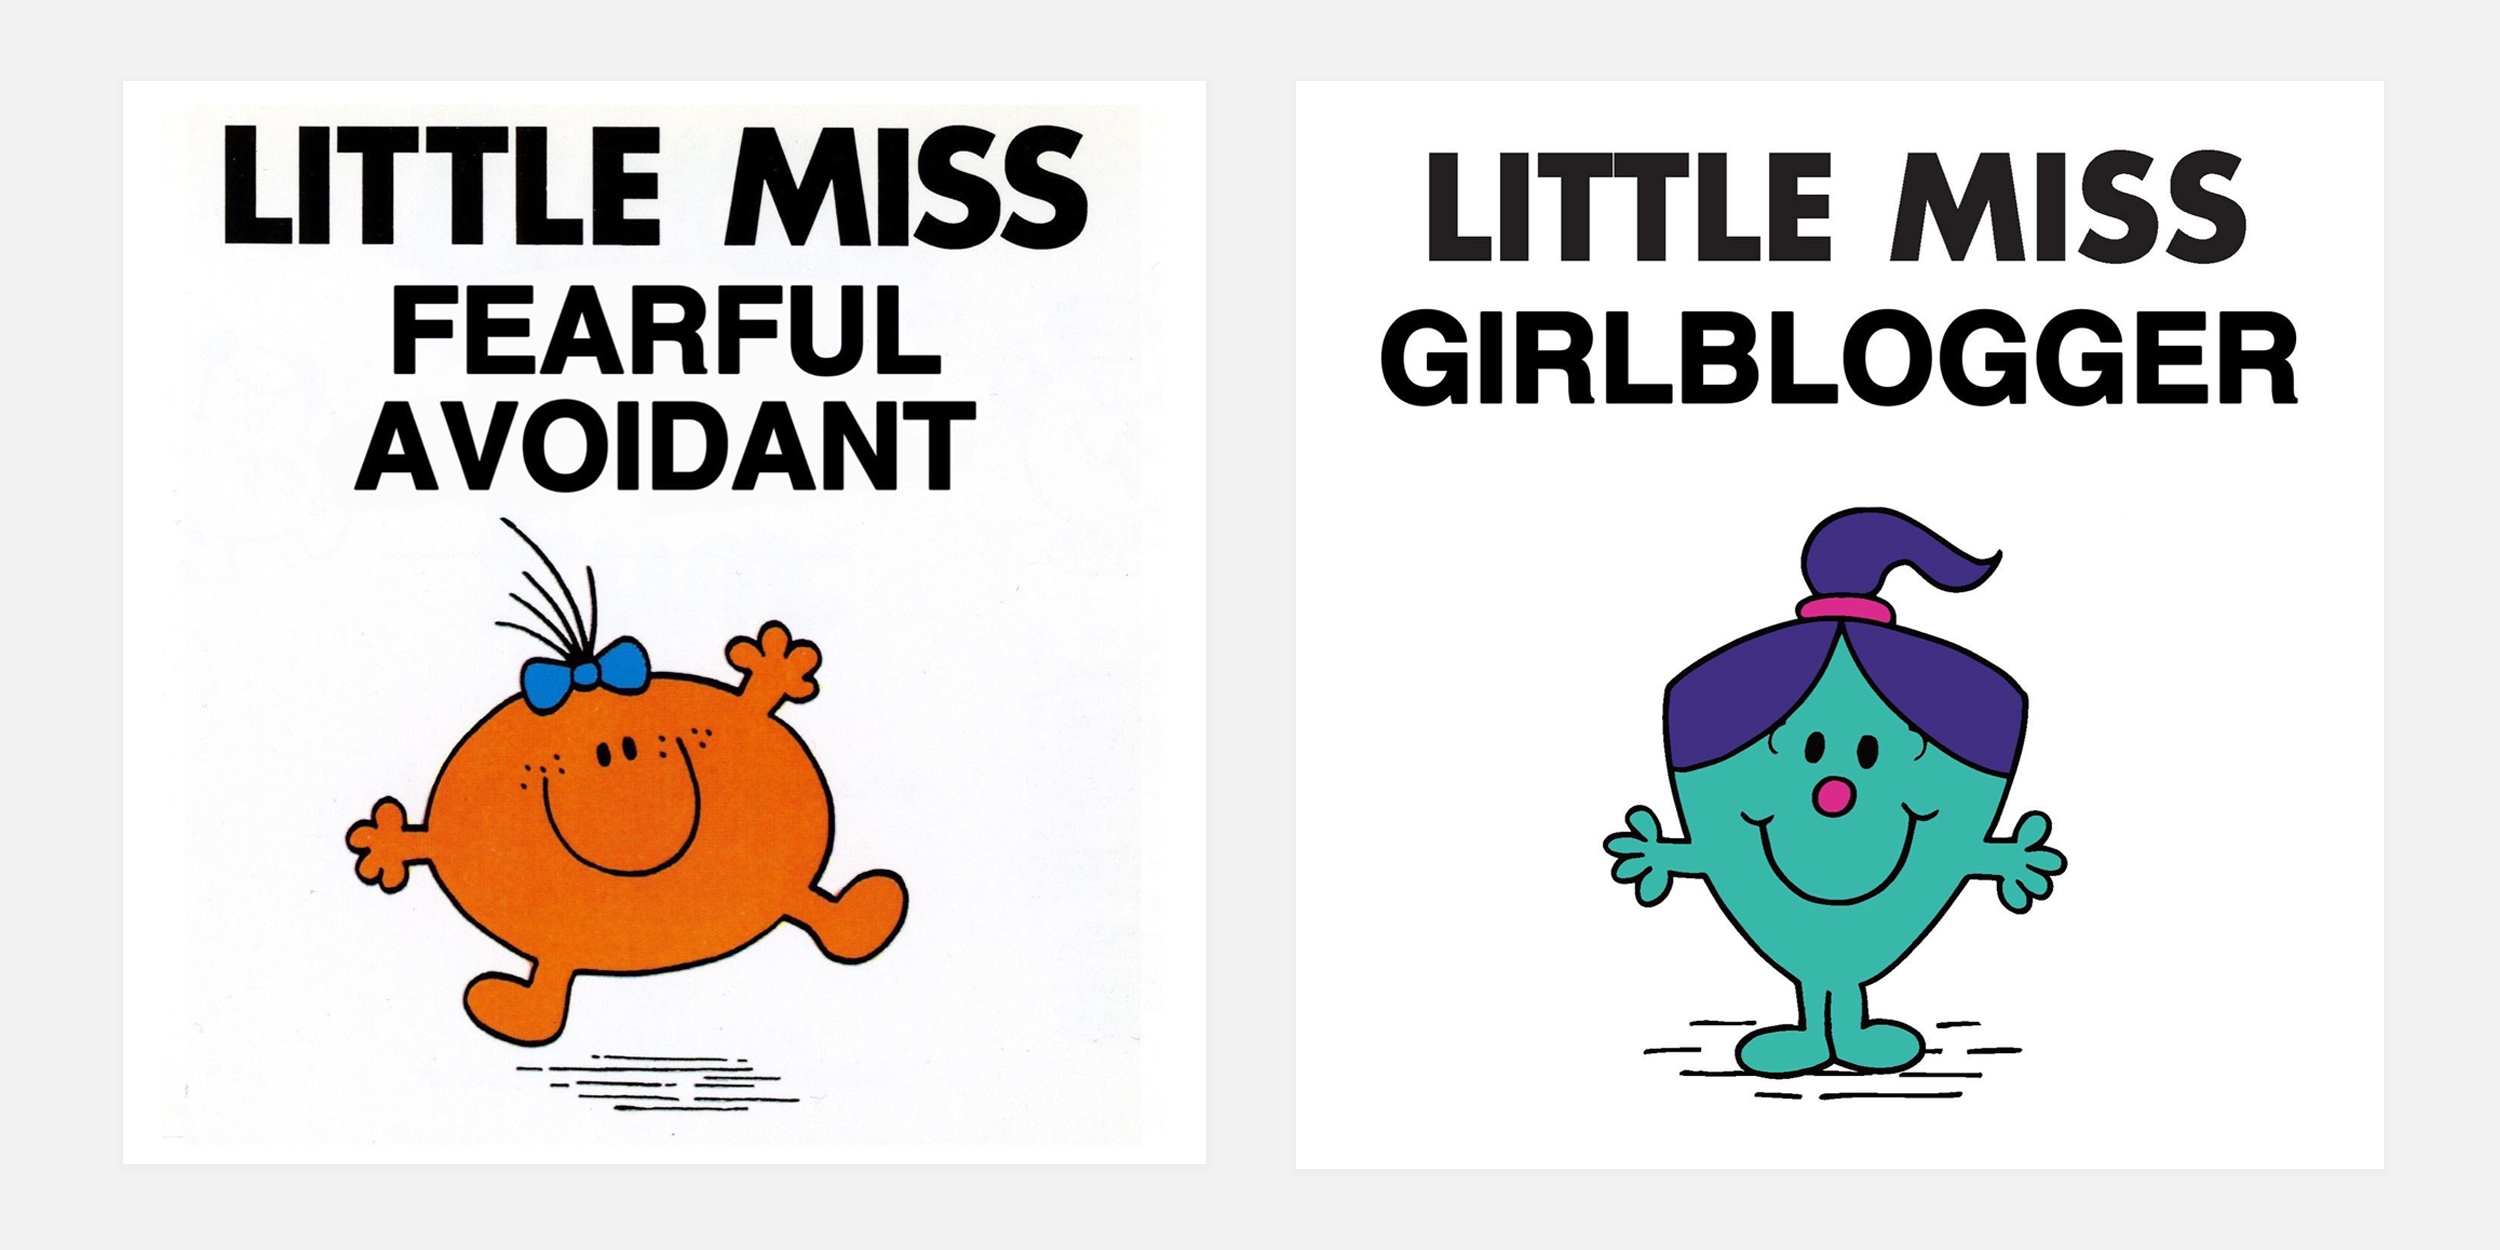 why-are-mr-men-and-little-miss-memes-all-over-social-media